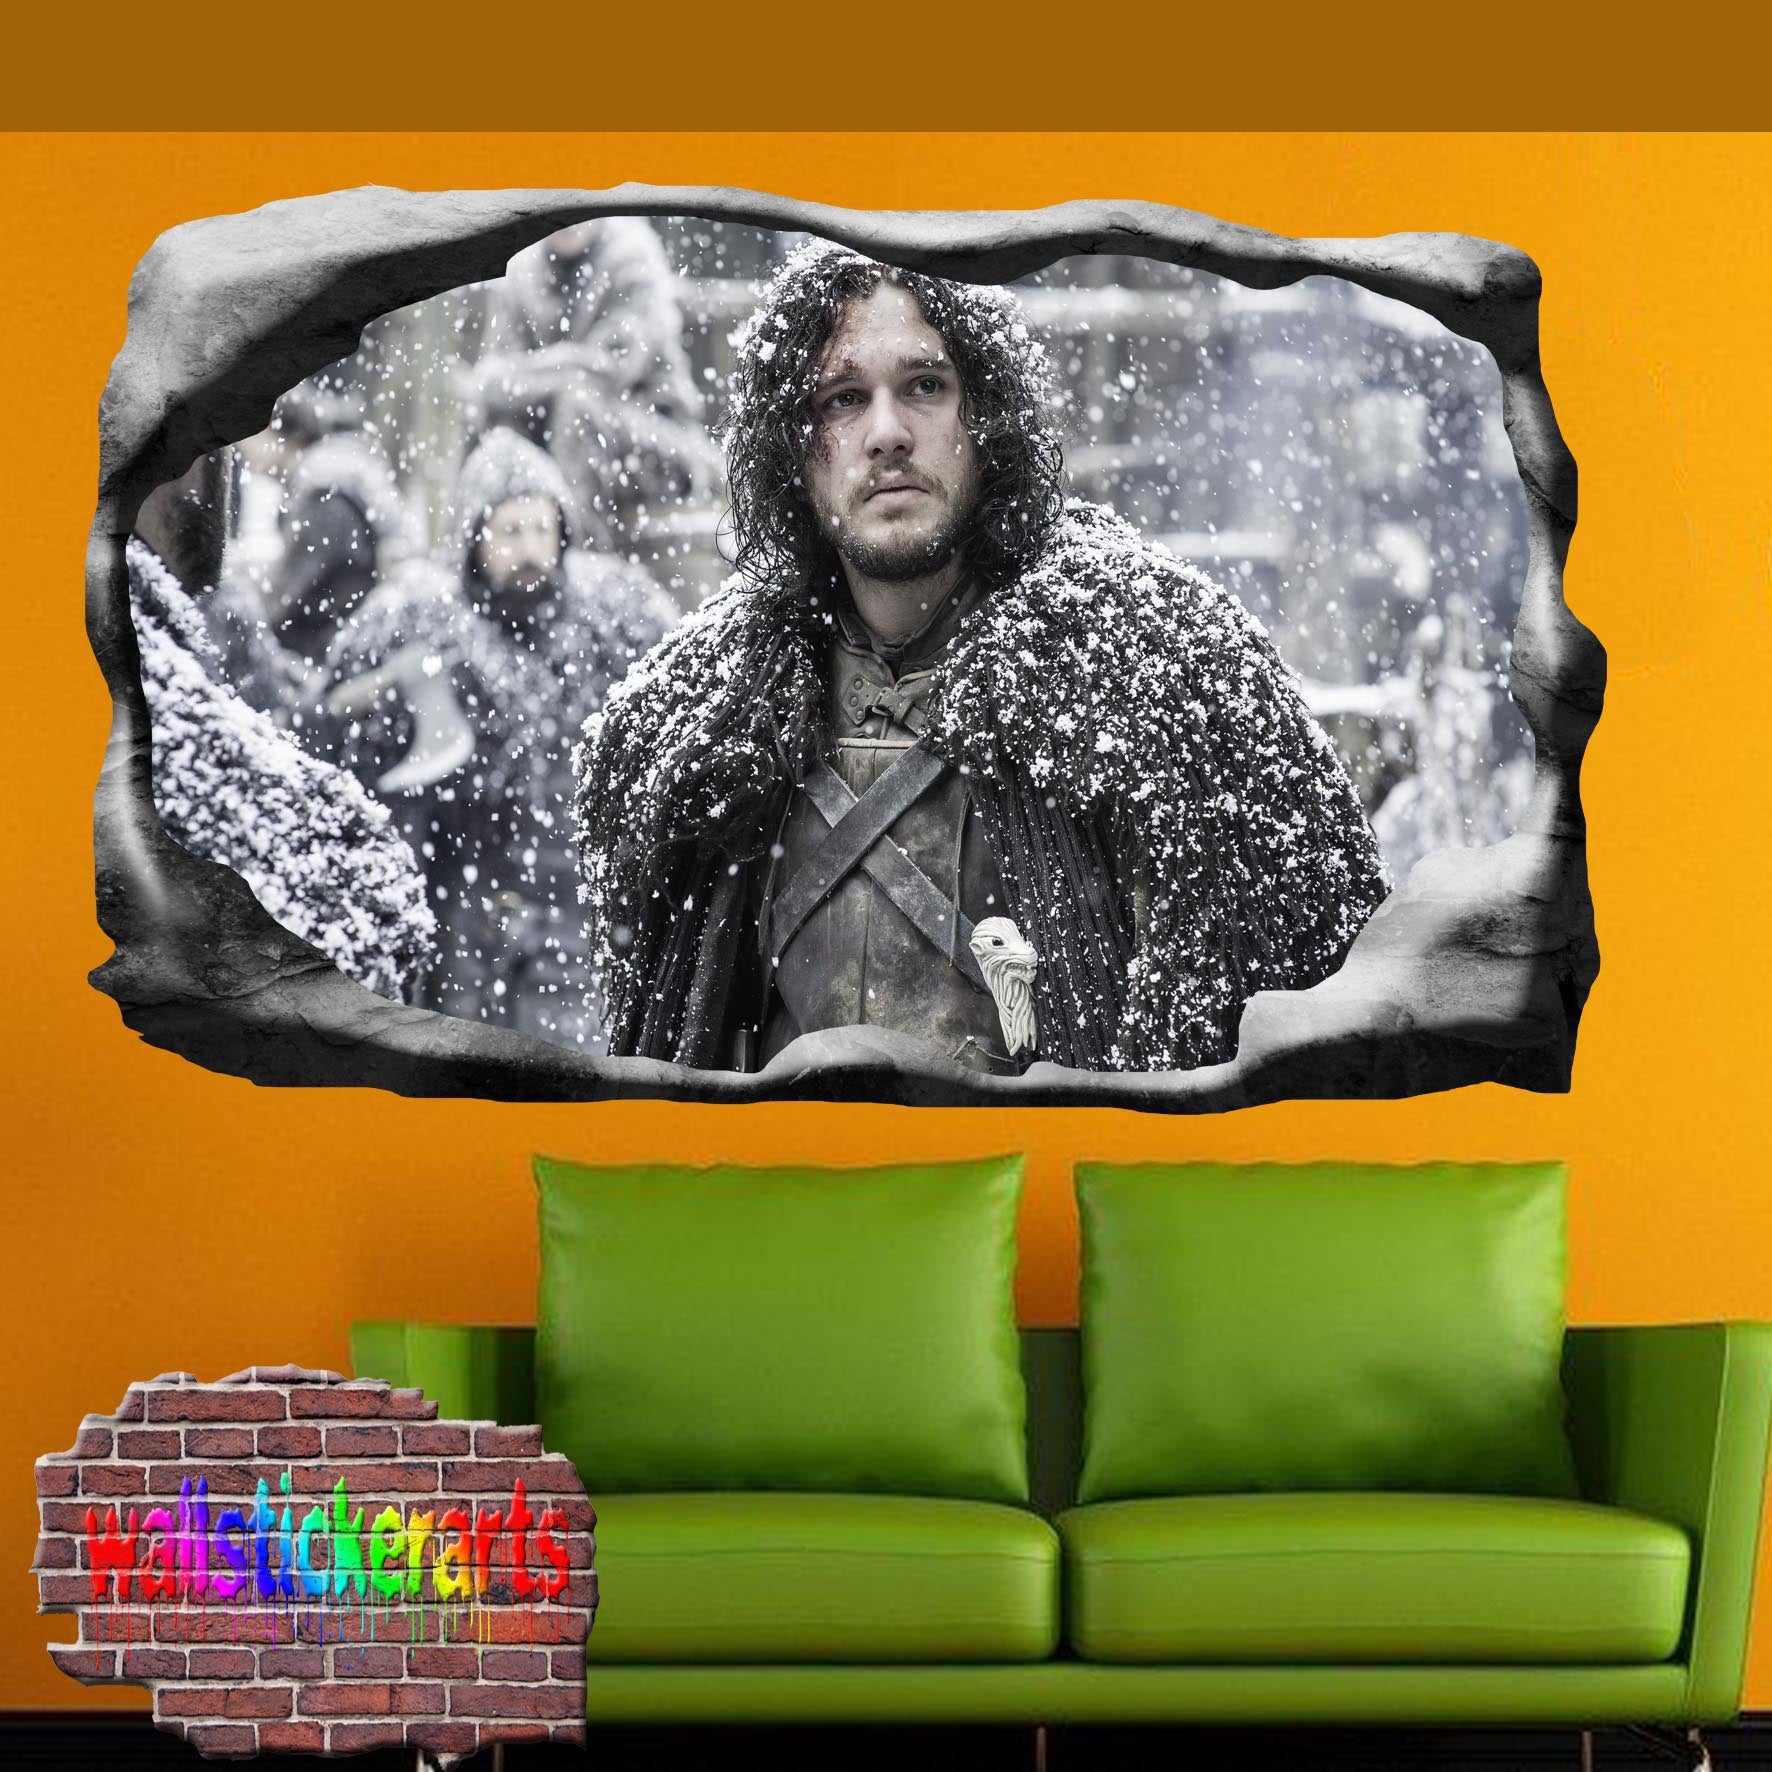 Game of Thrones Character Jon Snow wall sticker poster decal mural